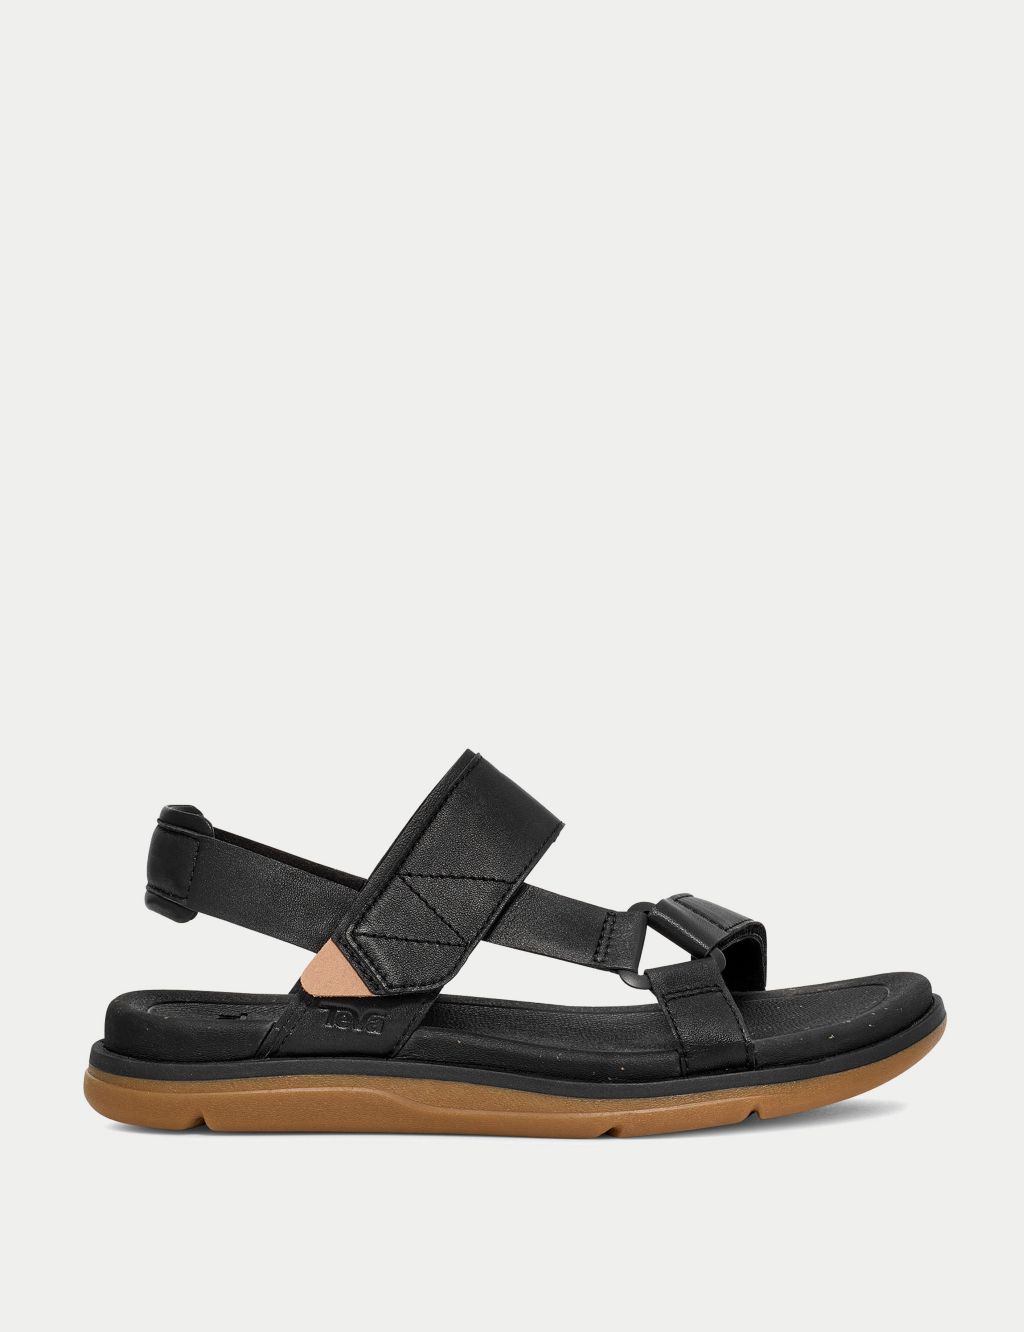 Madera Leather Flat Slingback Sandals 3 of 5